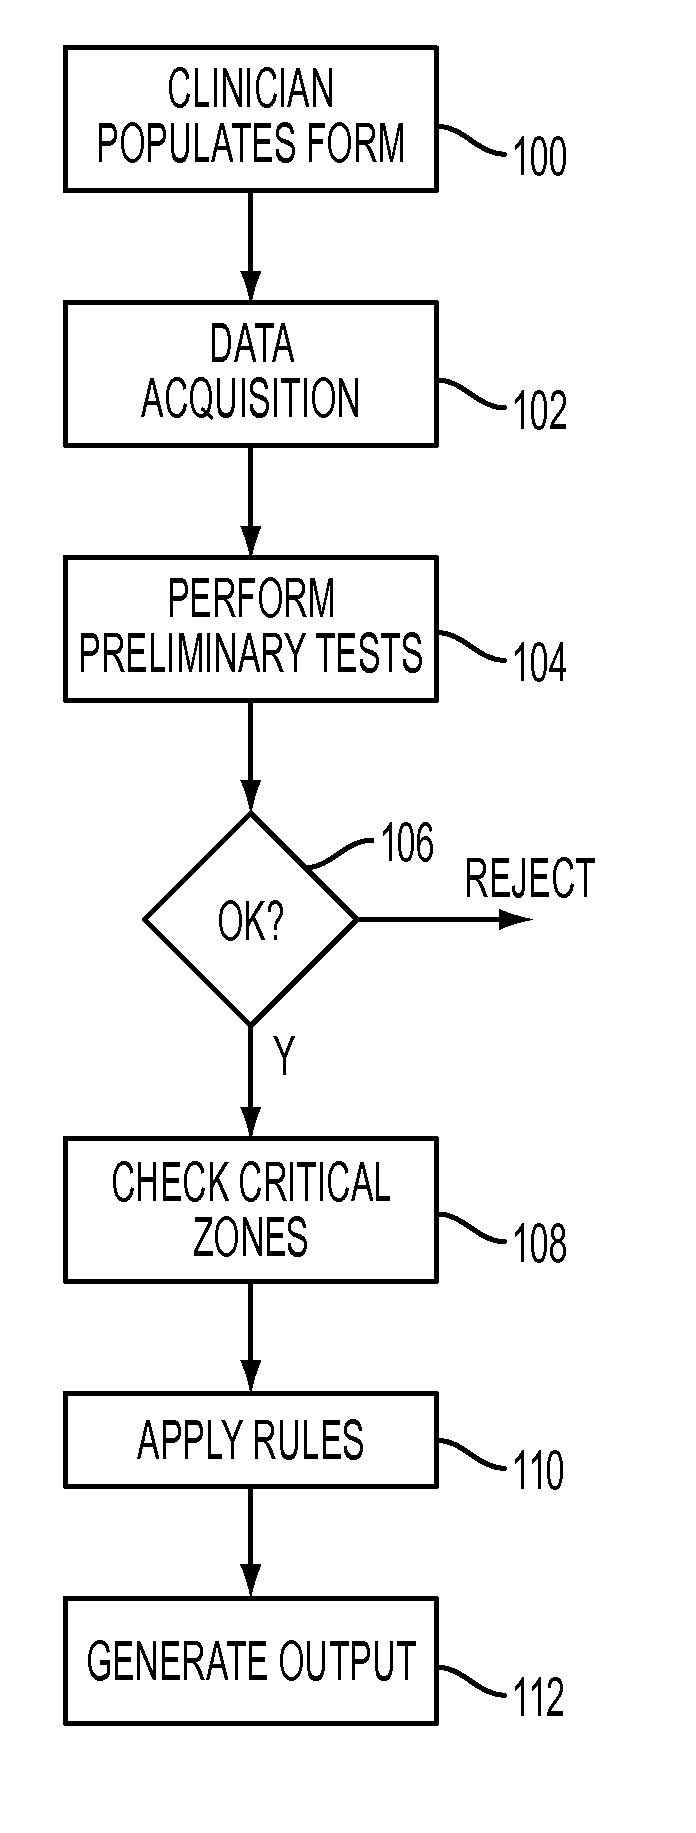 Method and apparatus for analyzing patient medical records